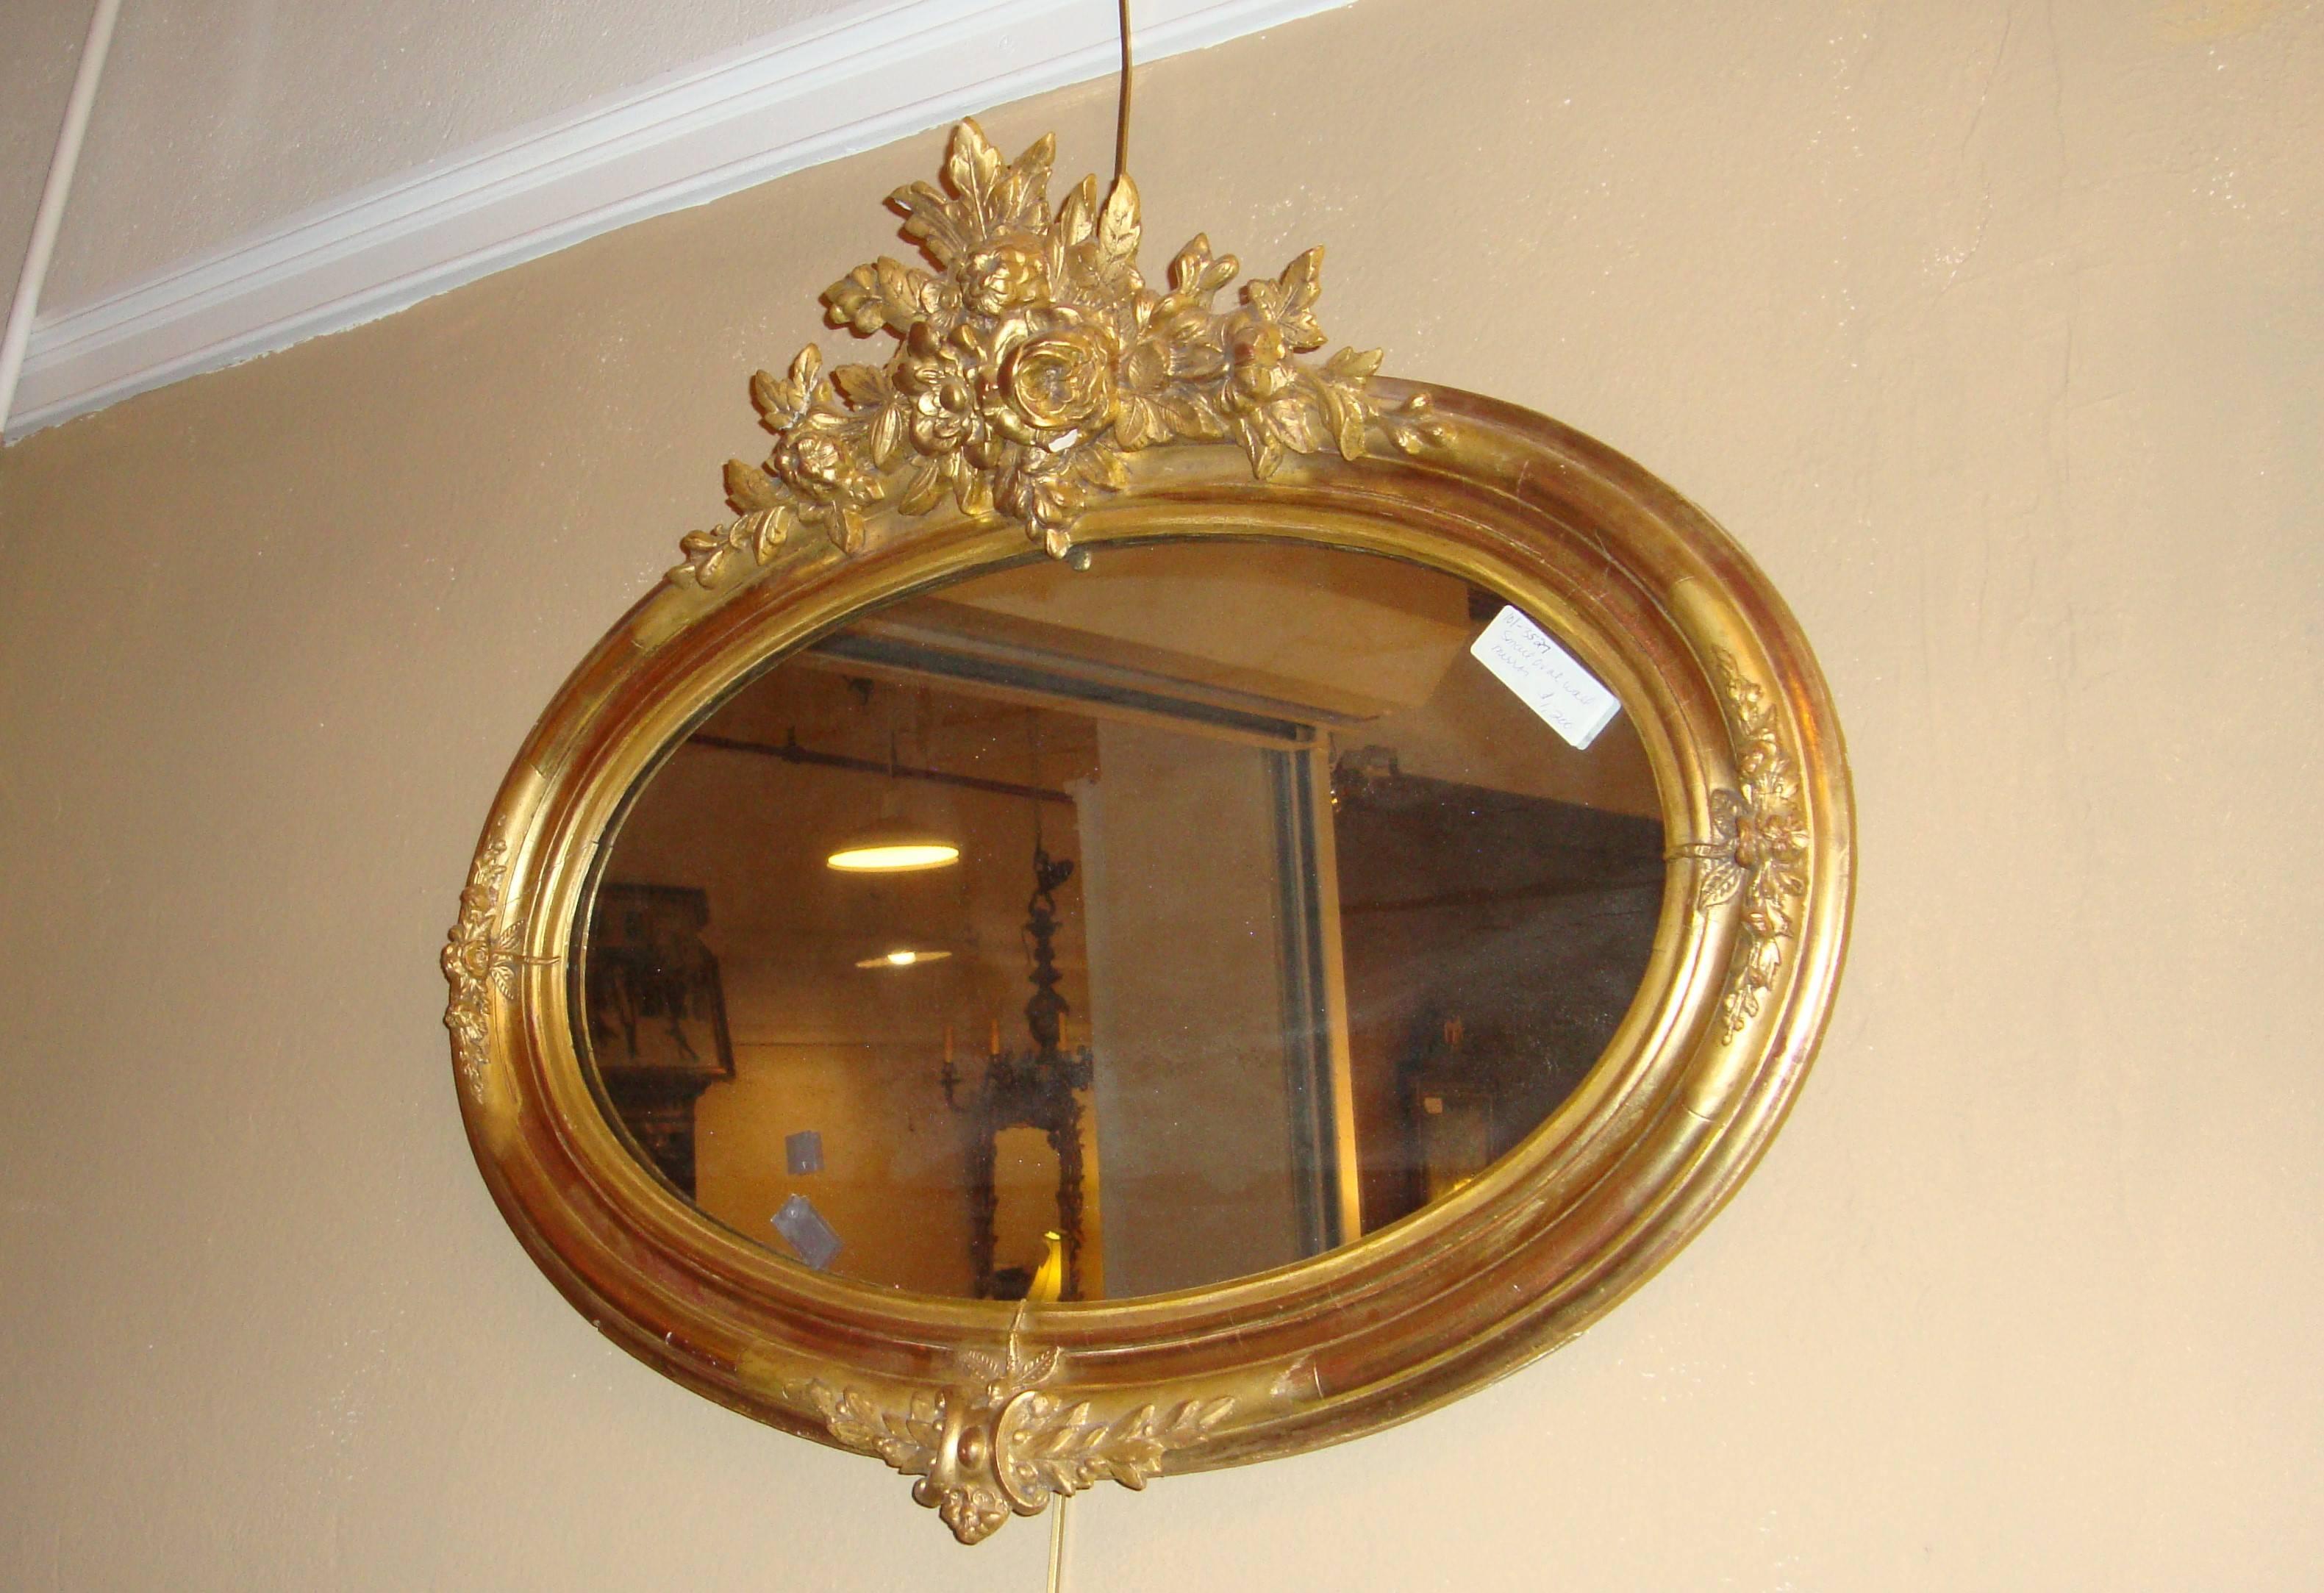 A small Louis XVI style oval wall mirror, with gilt and floral accents.